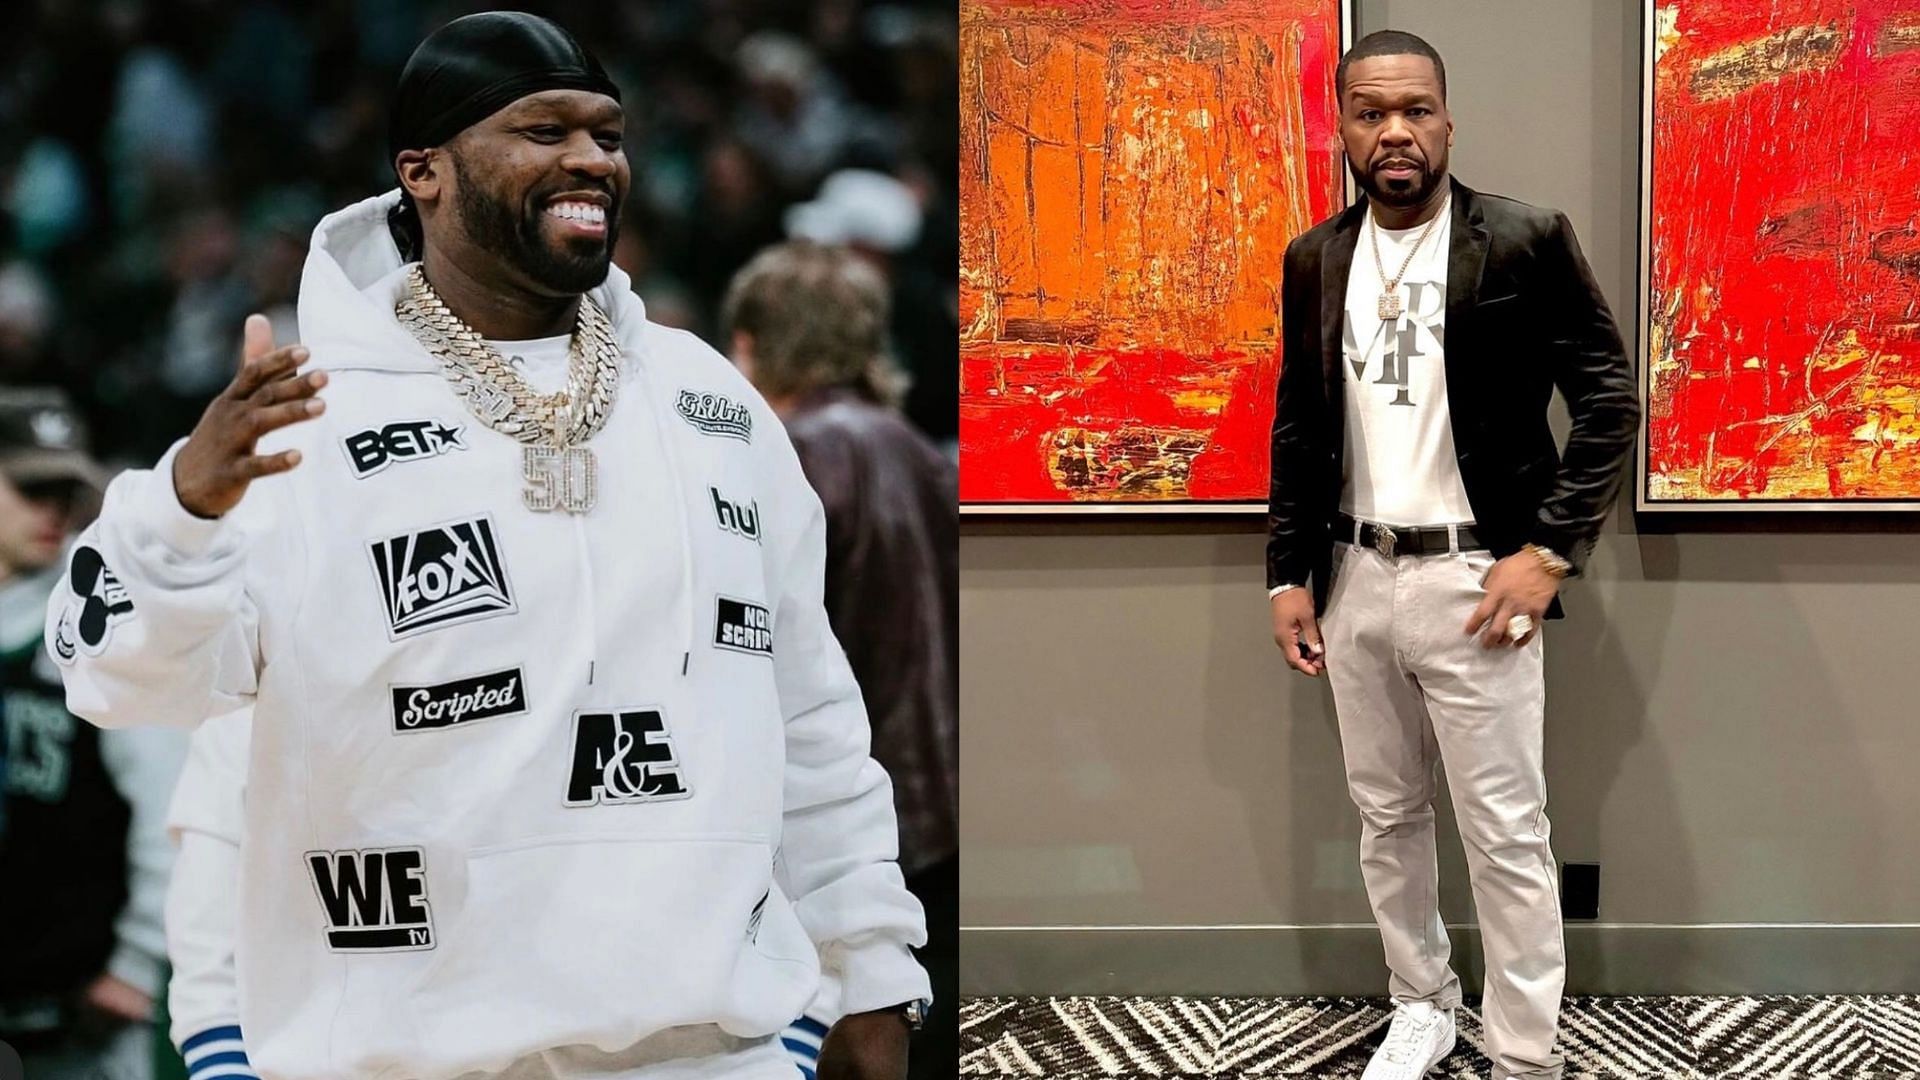 “He’s 30 Cent now”: 50 Cent going viral after showing major weight loss ...